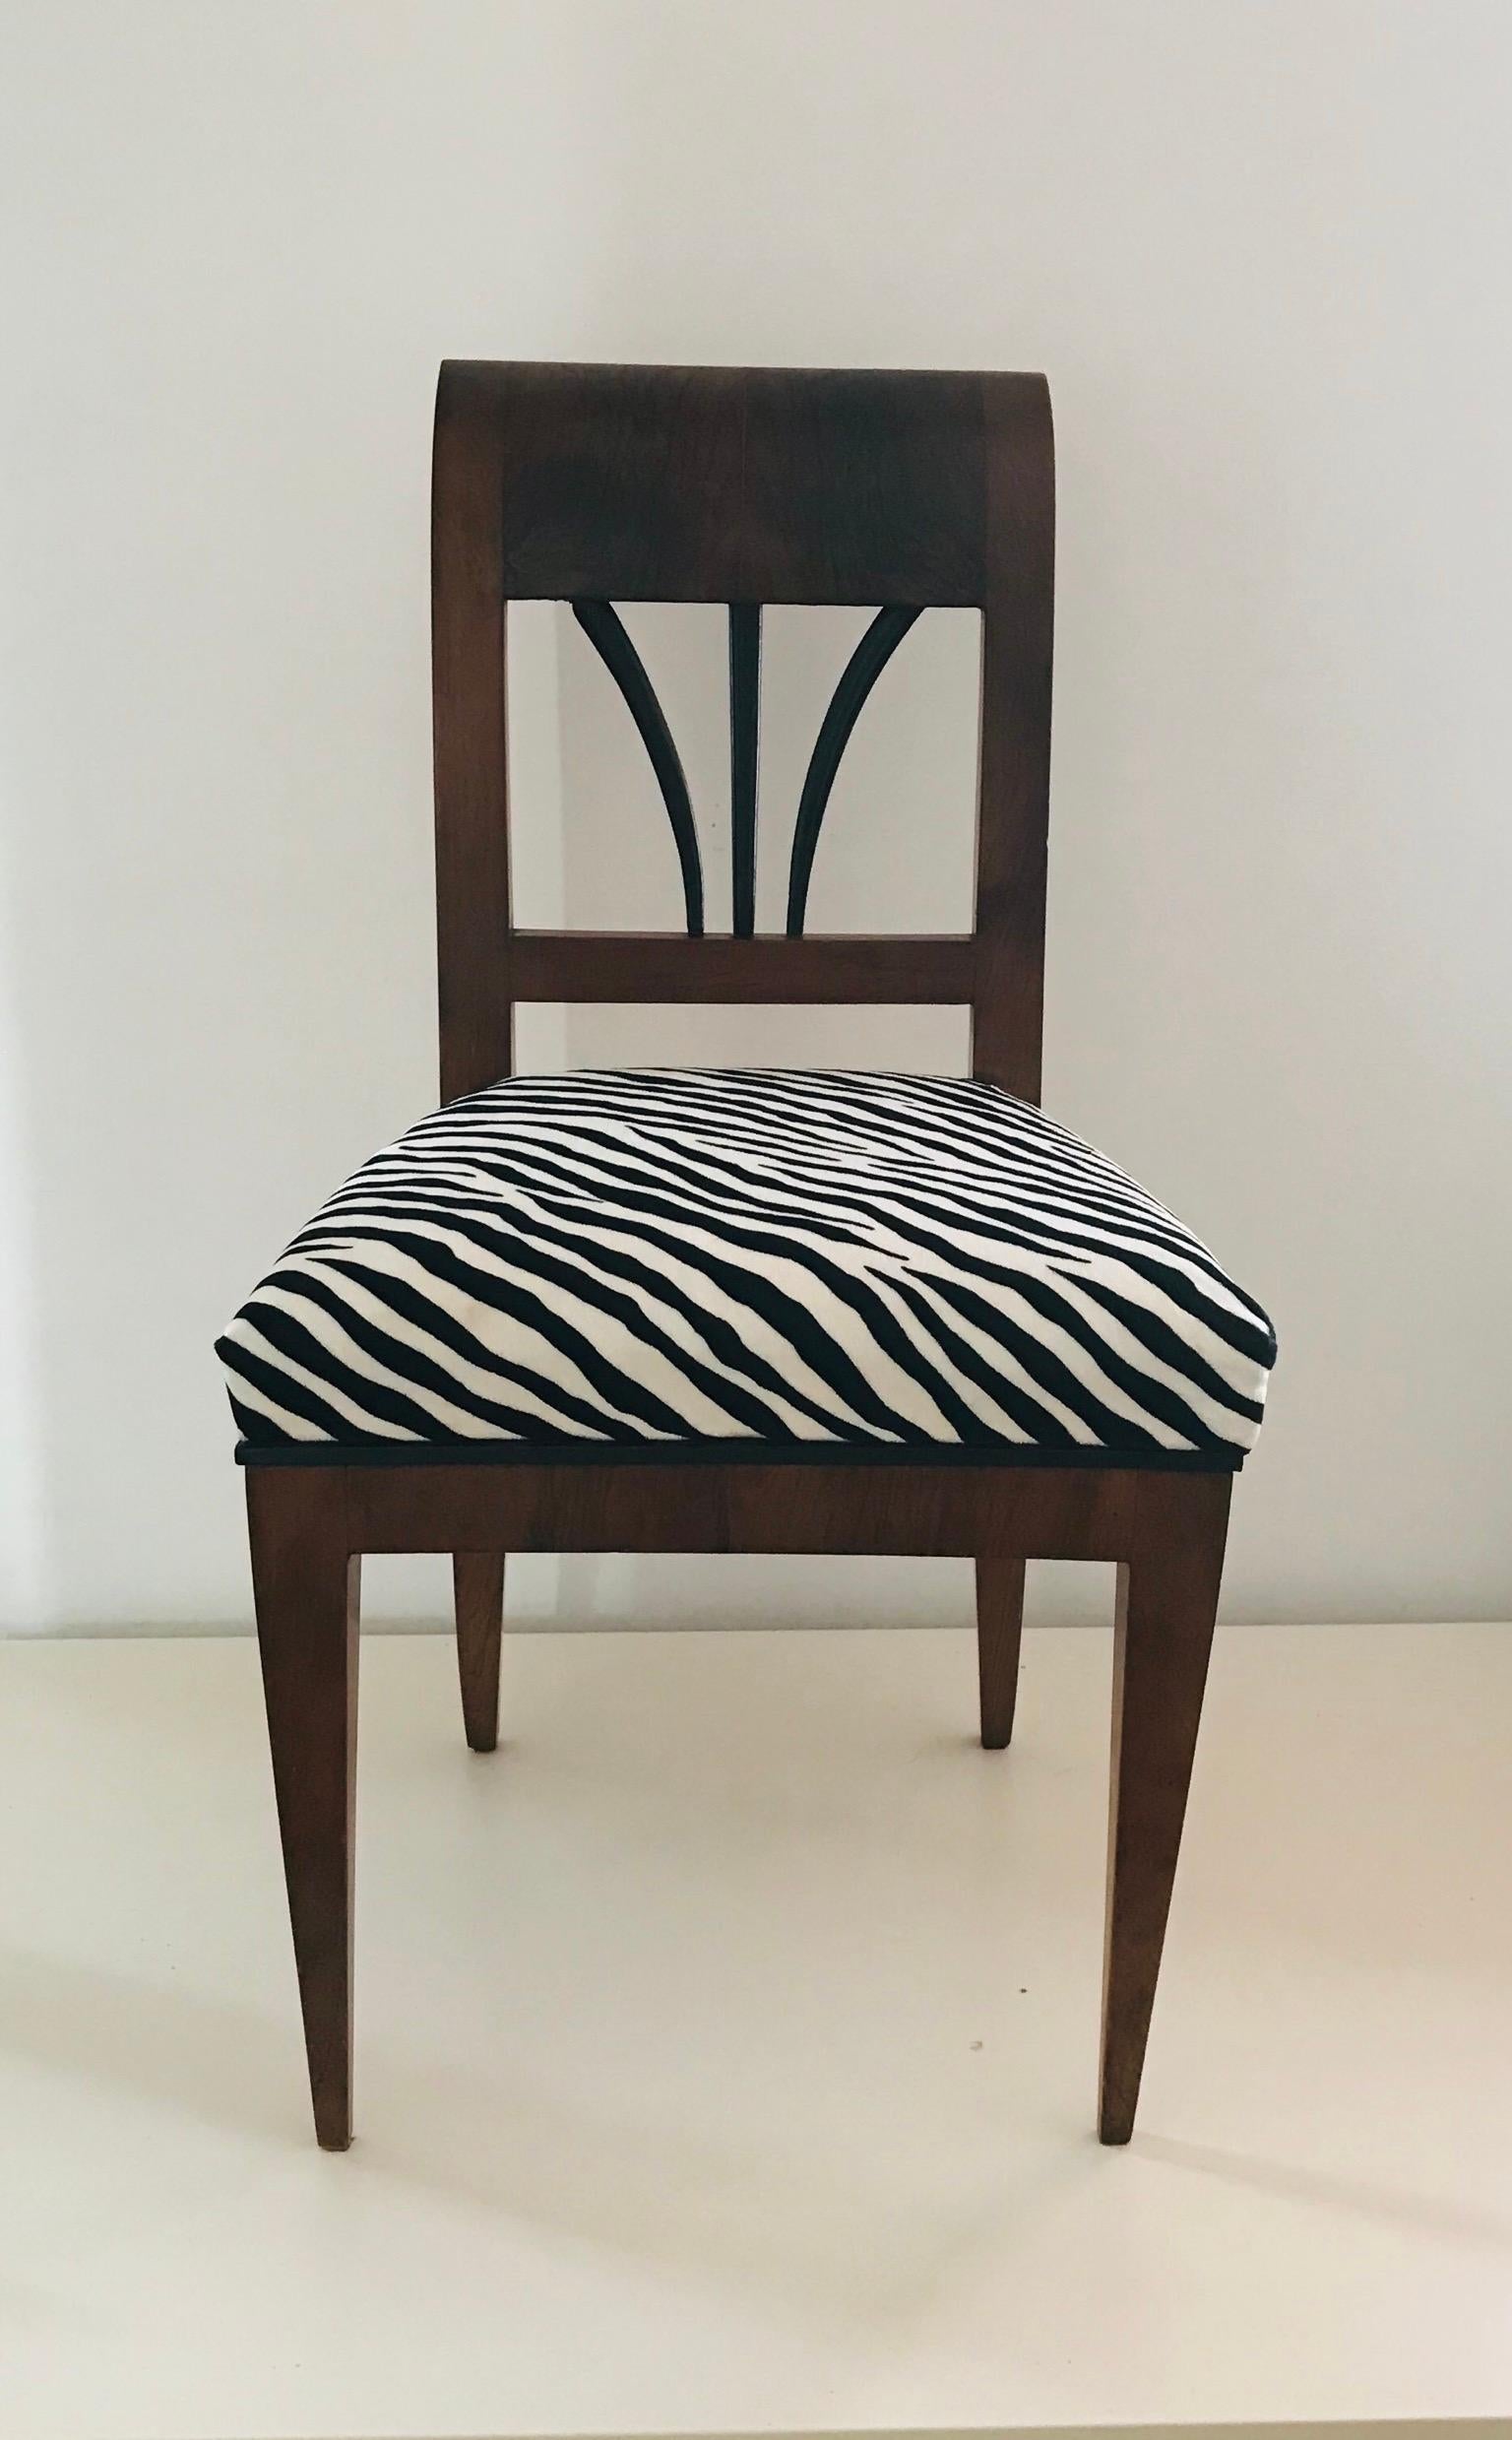 Early 19th Century Pair of Biedermeier 1820 Viennese Walnut Chairs  in Zebra Chenile  Textile For Sale